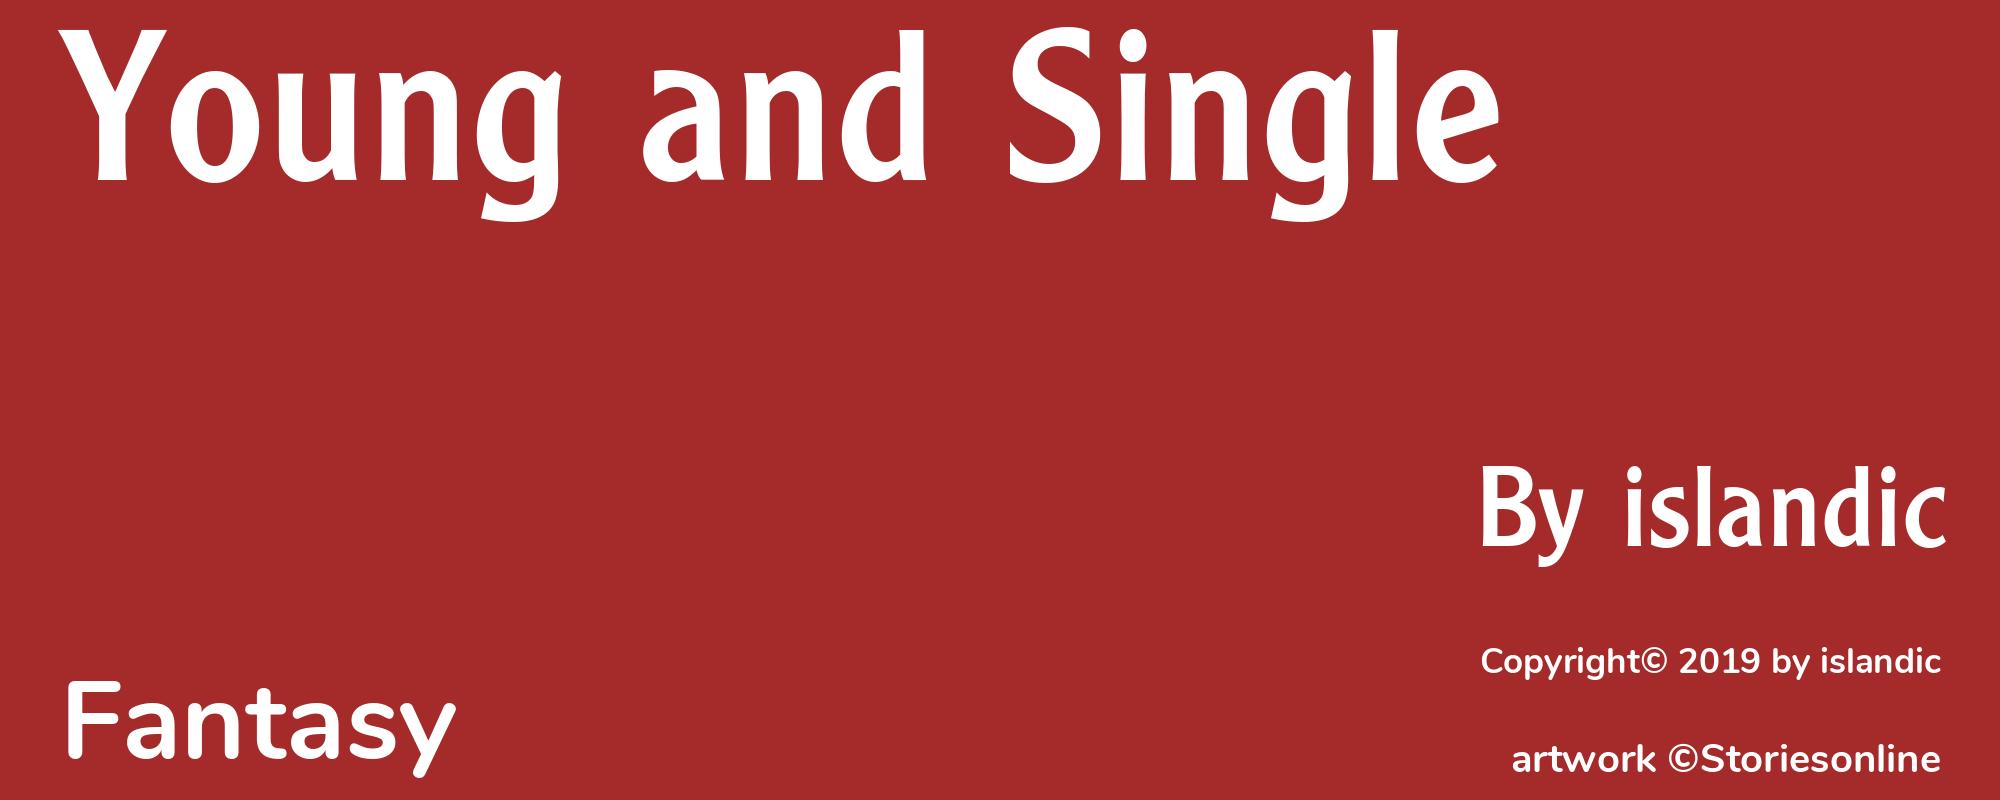 Young and Single - Cover